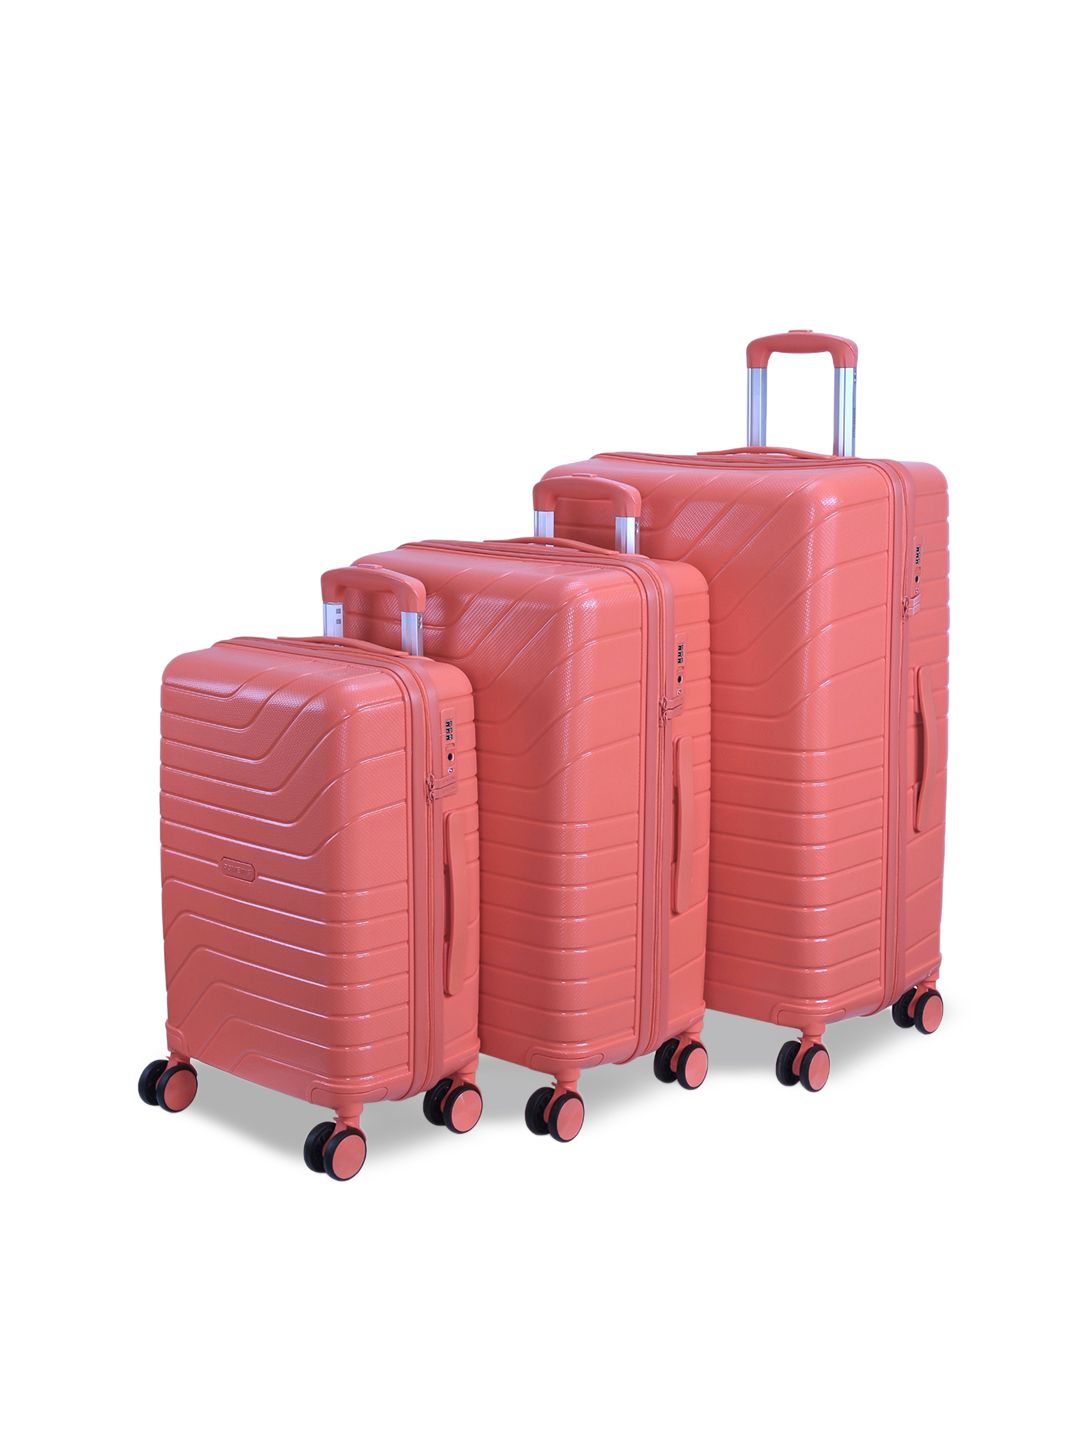 ROMEING Tuscany Set Of 3 Coral Red Textured Hard Sided Polypropylene Trolley Suitcase Price in India